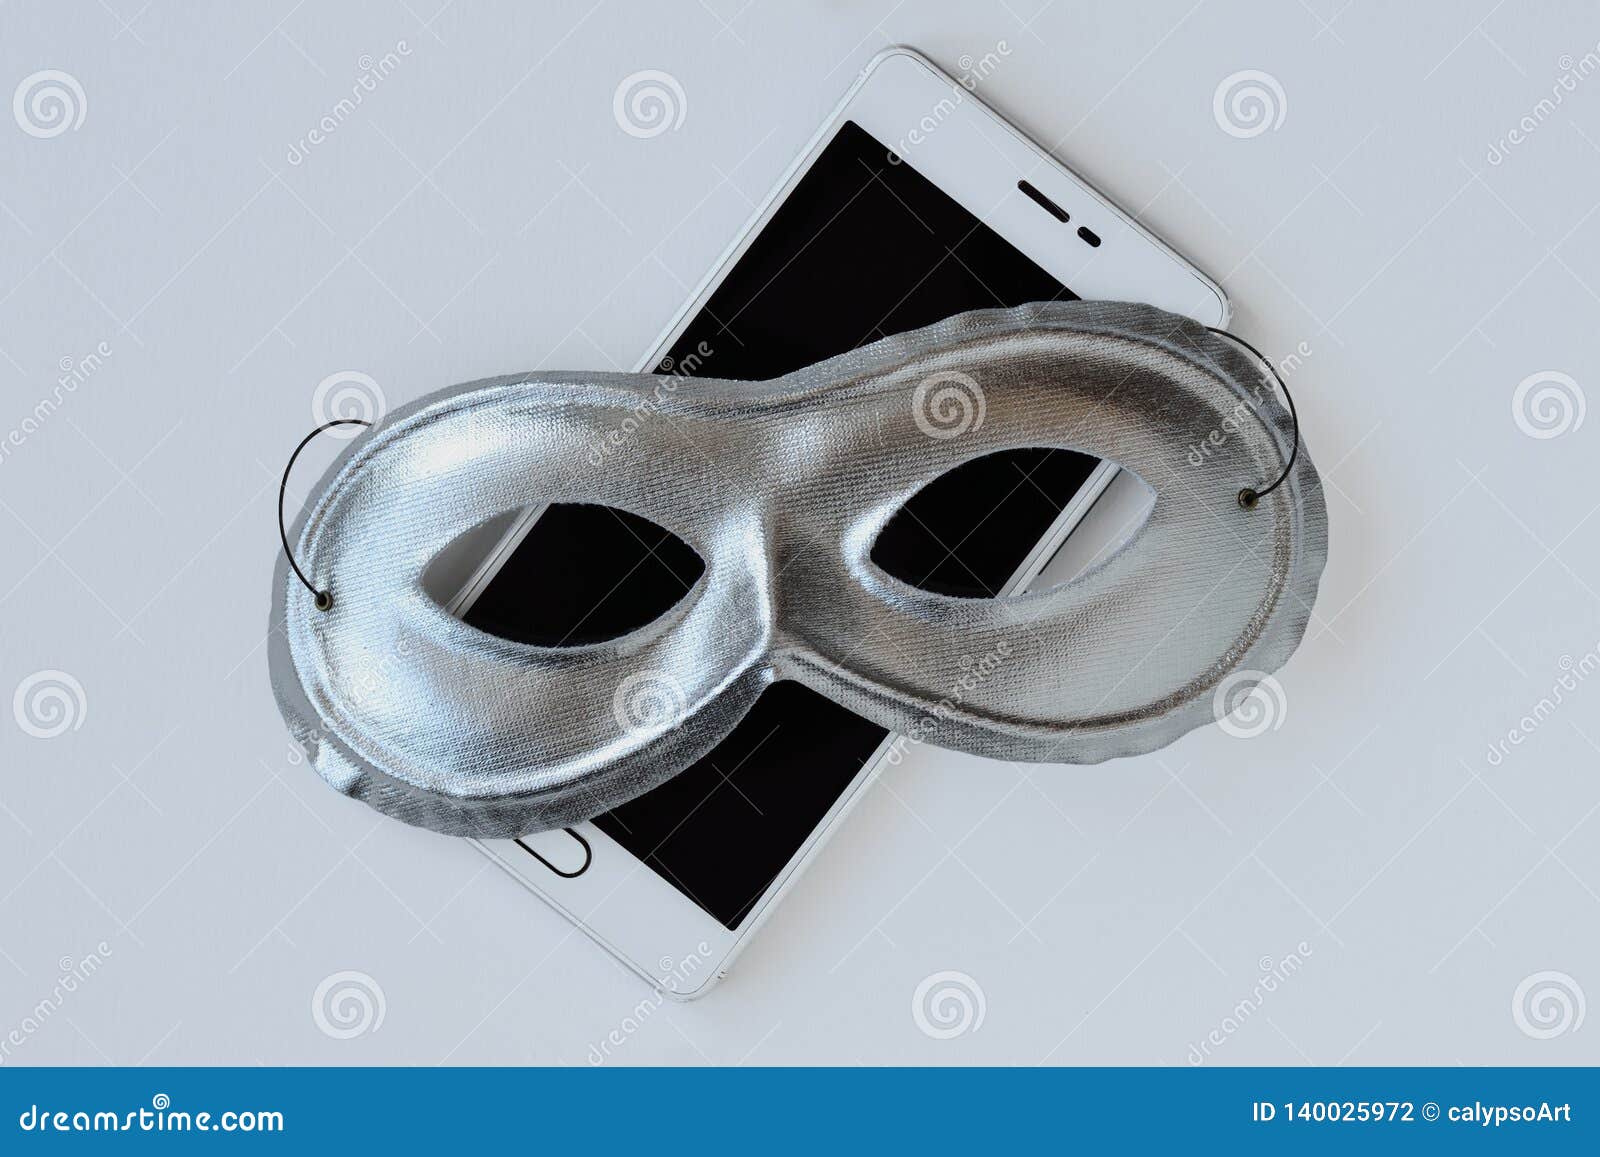 mask on mobile phone - concept of privacy, security and anonymity of mobile phones